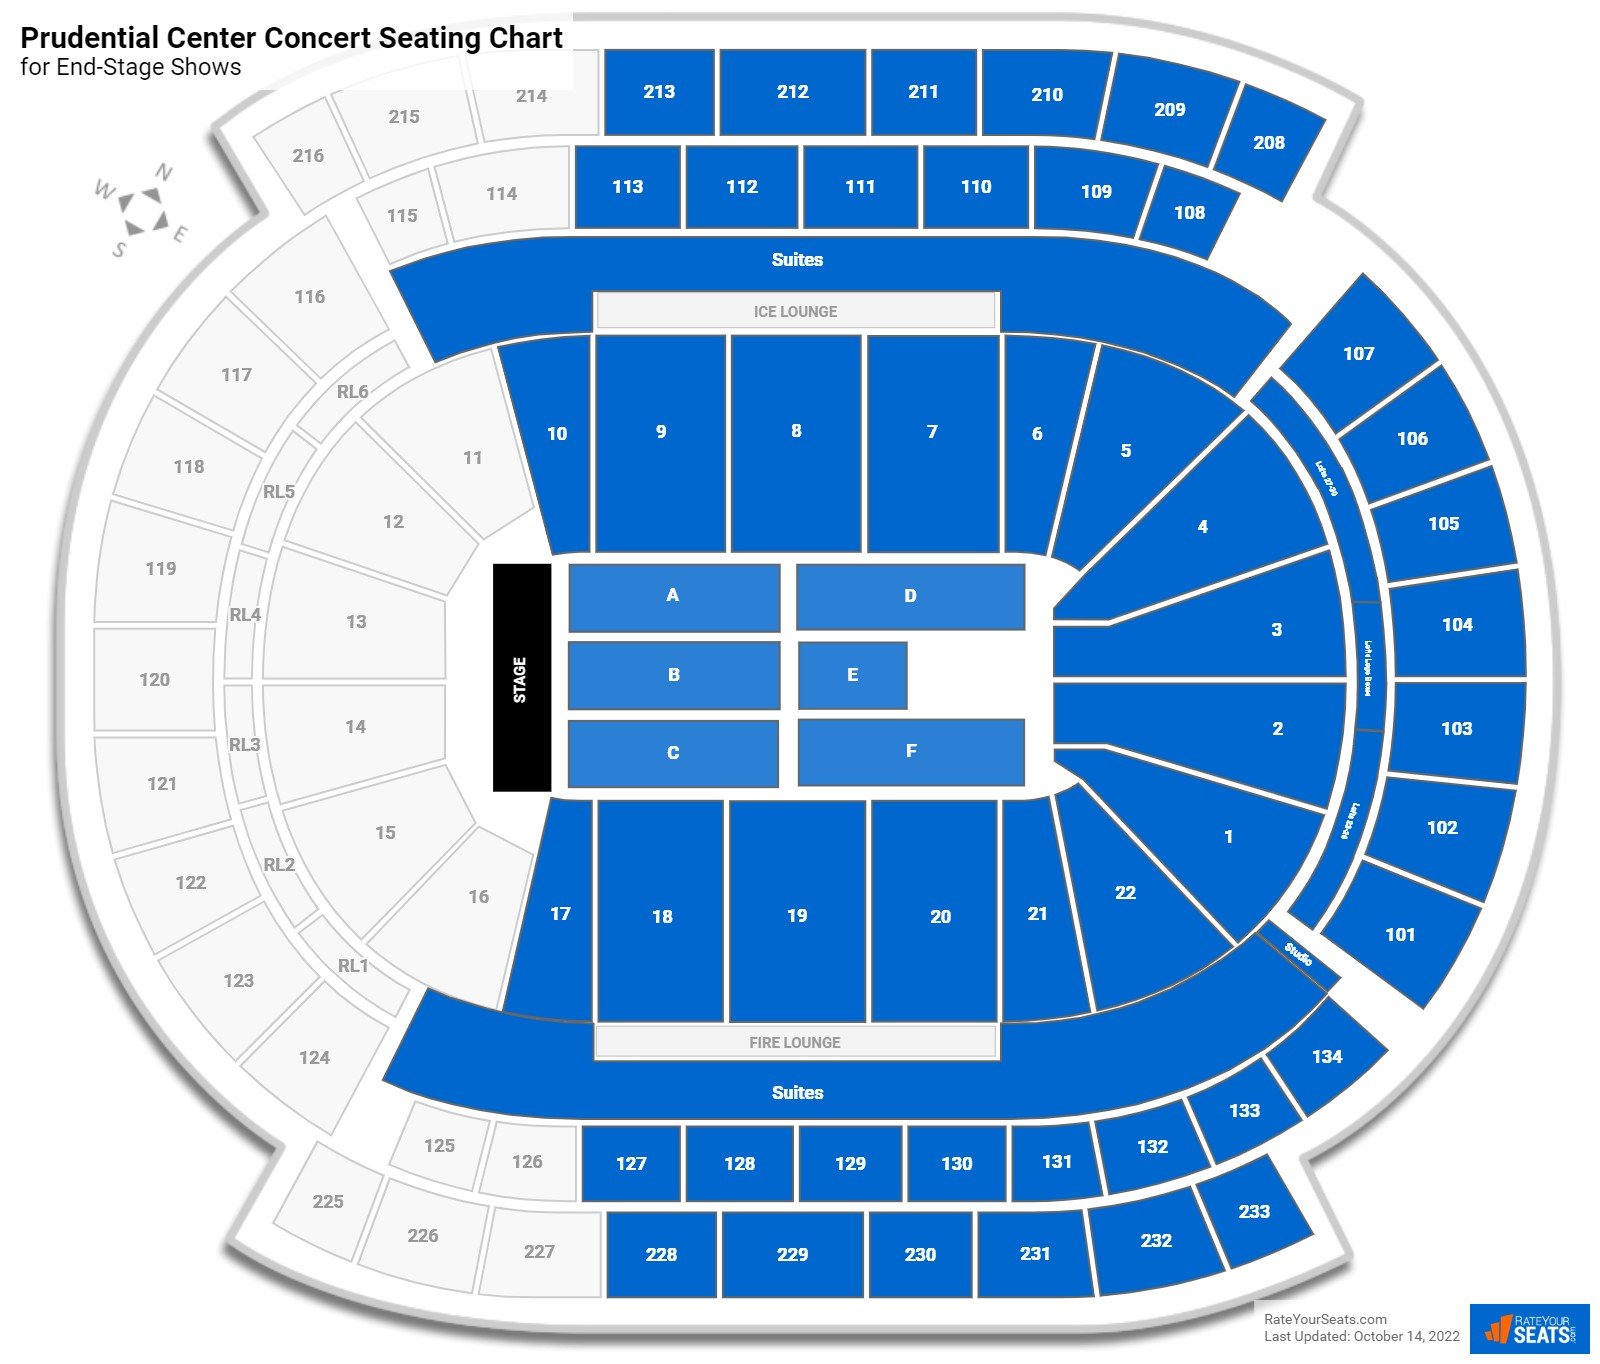 Prudential Center Concert Seating Chart